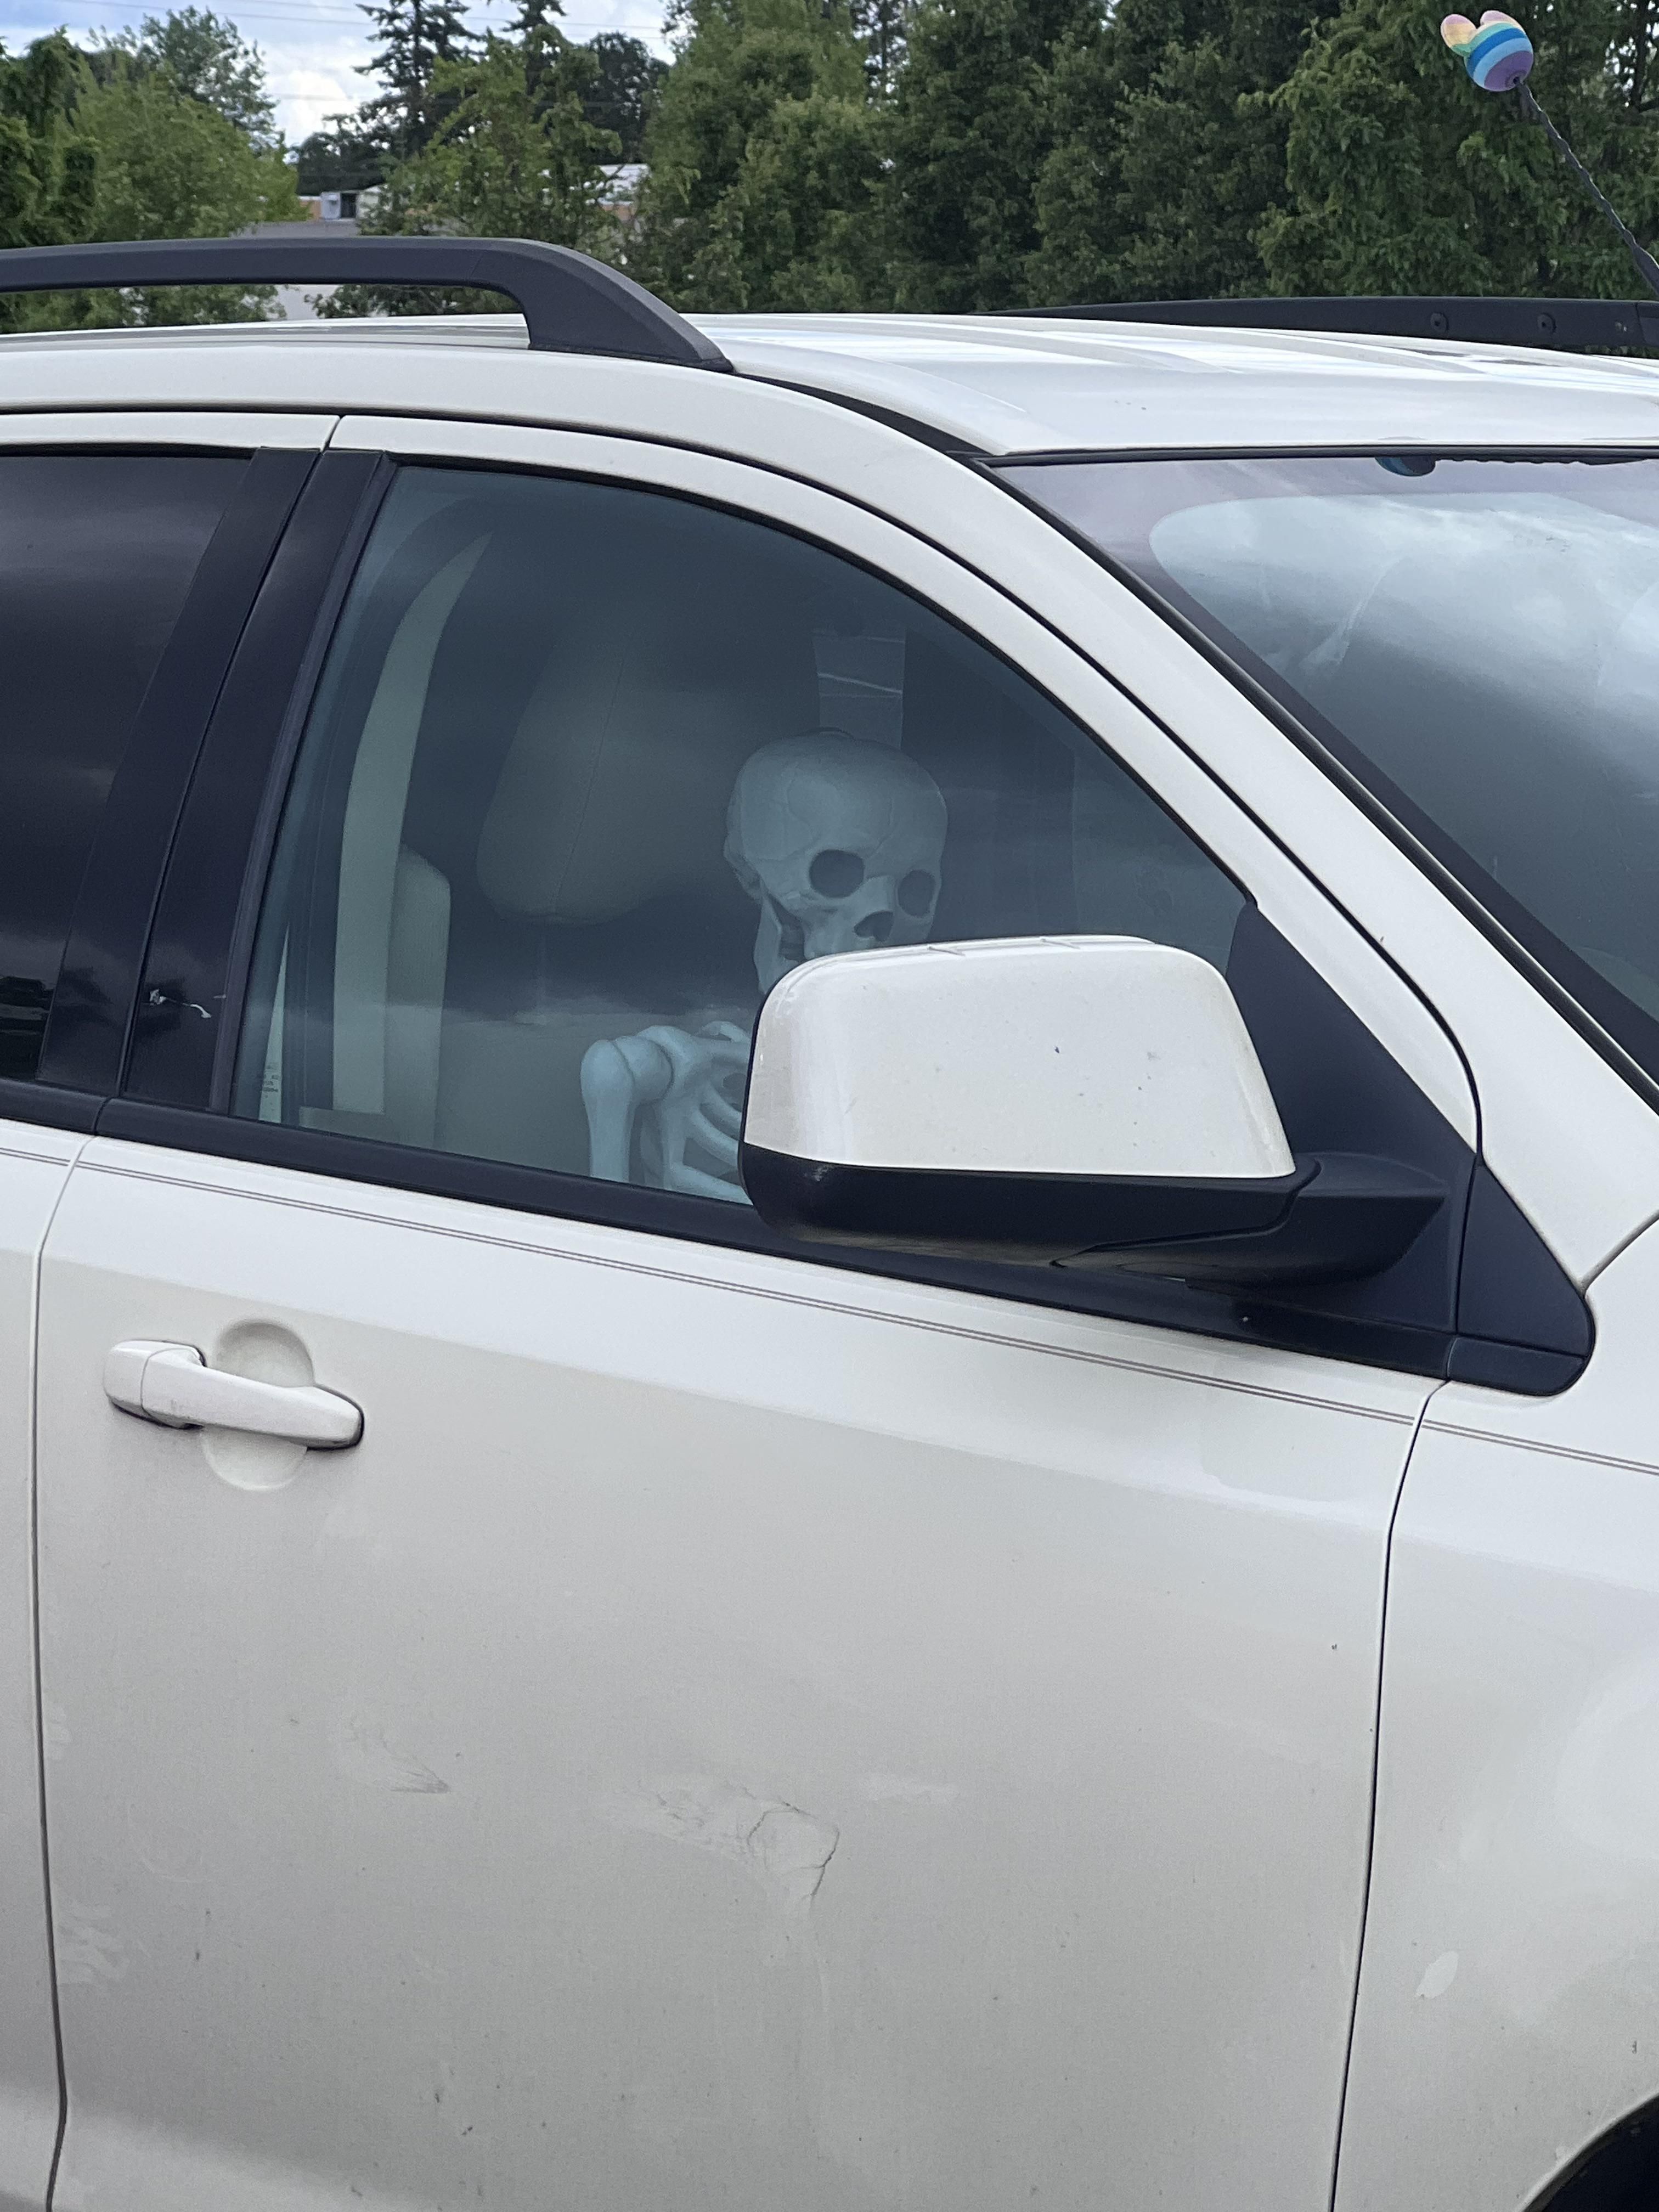 The person parked across from me deadass had a skeleton in the passenger seat. It’s nowhere near halloween.